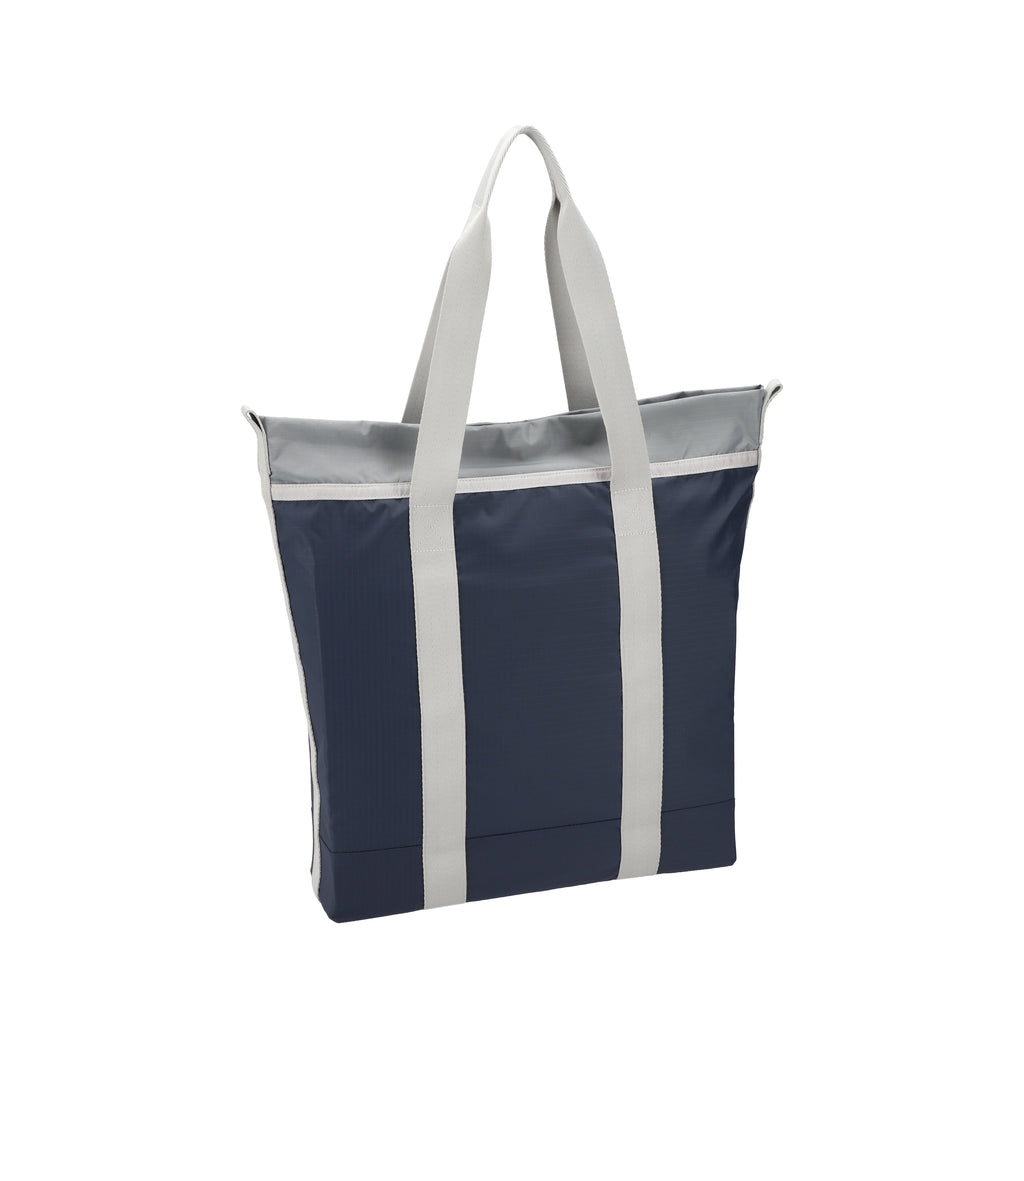 North/South Foldable Tote - 24402977783856